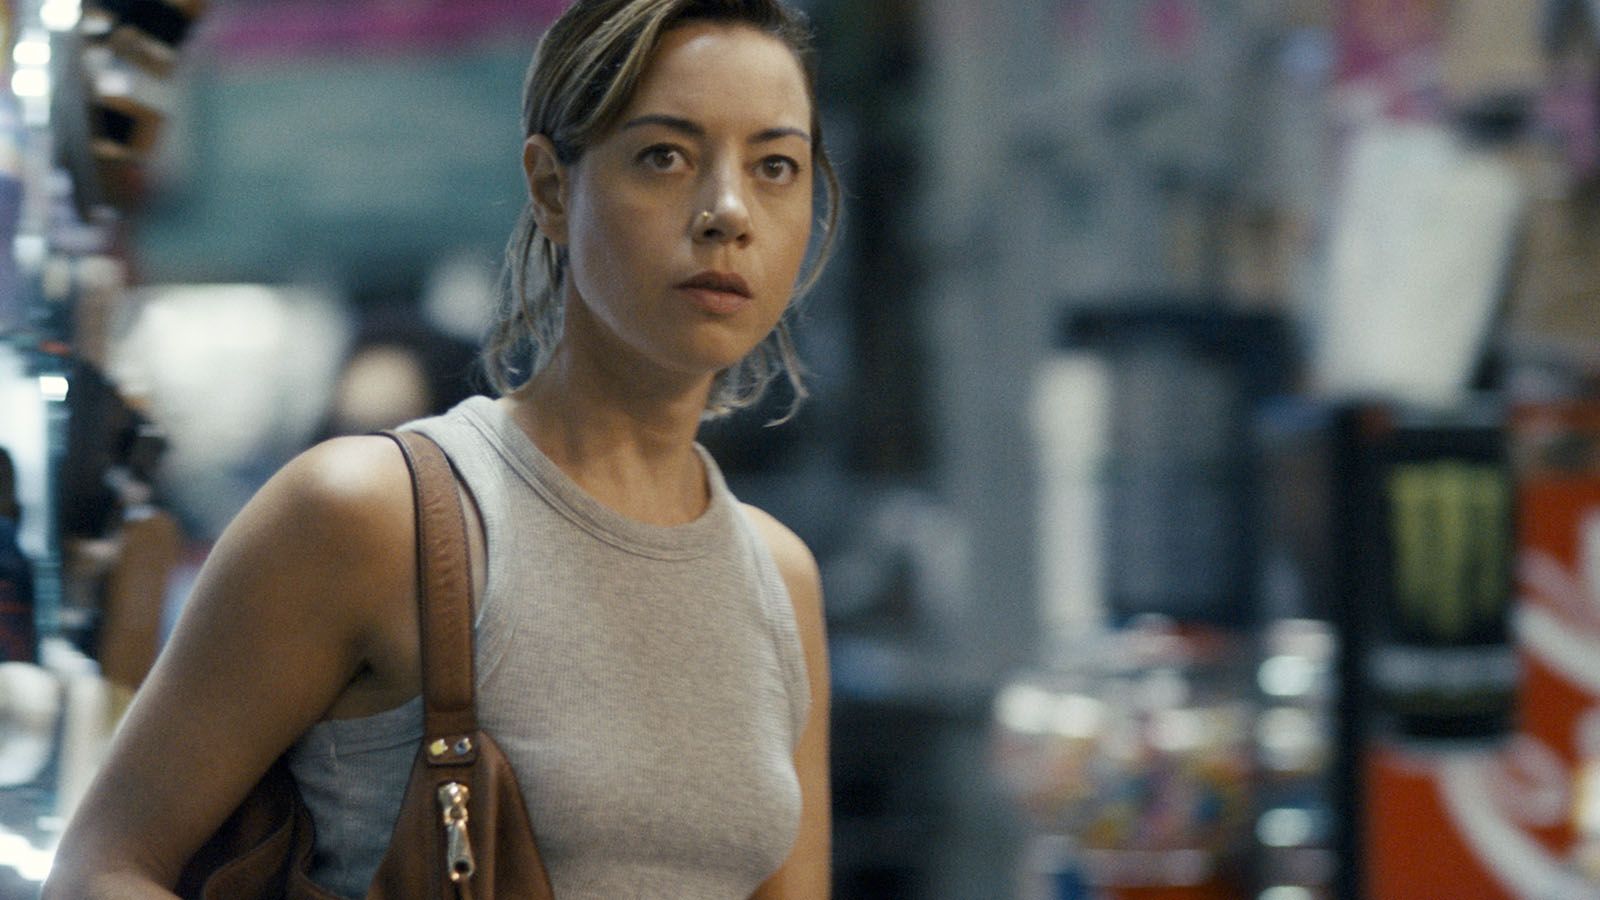 Aubrey Plaza shines in her dramatic role in "Emily the Criminal."